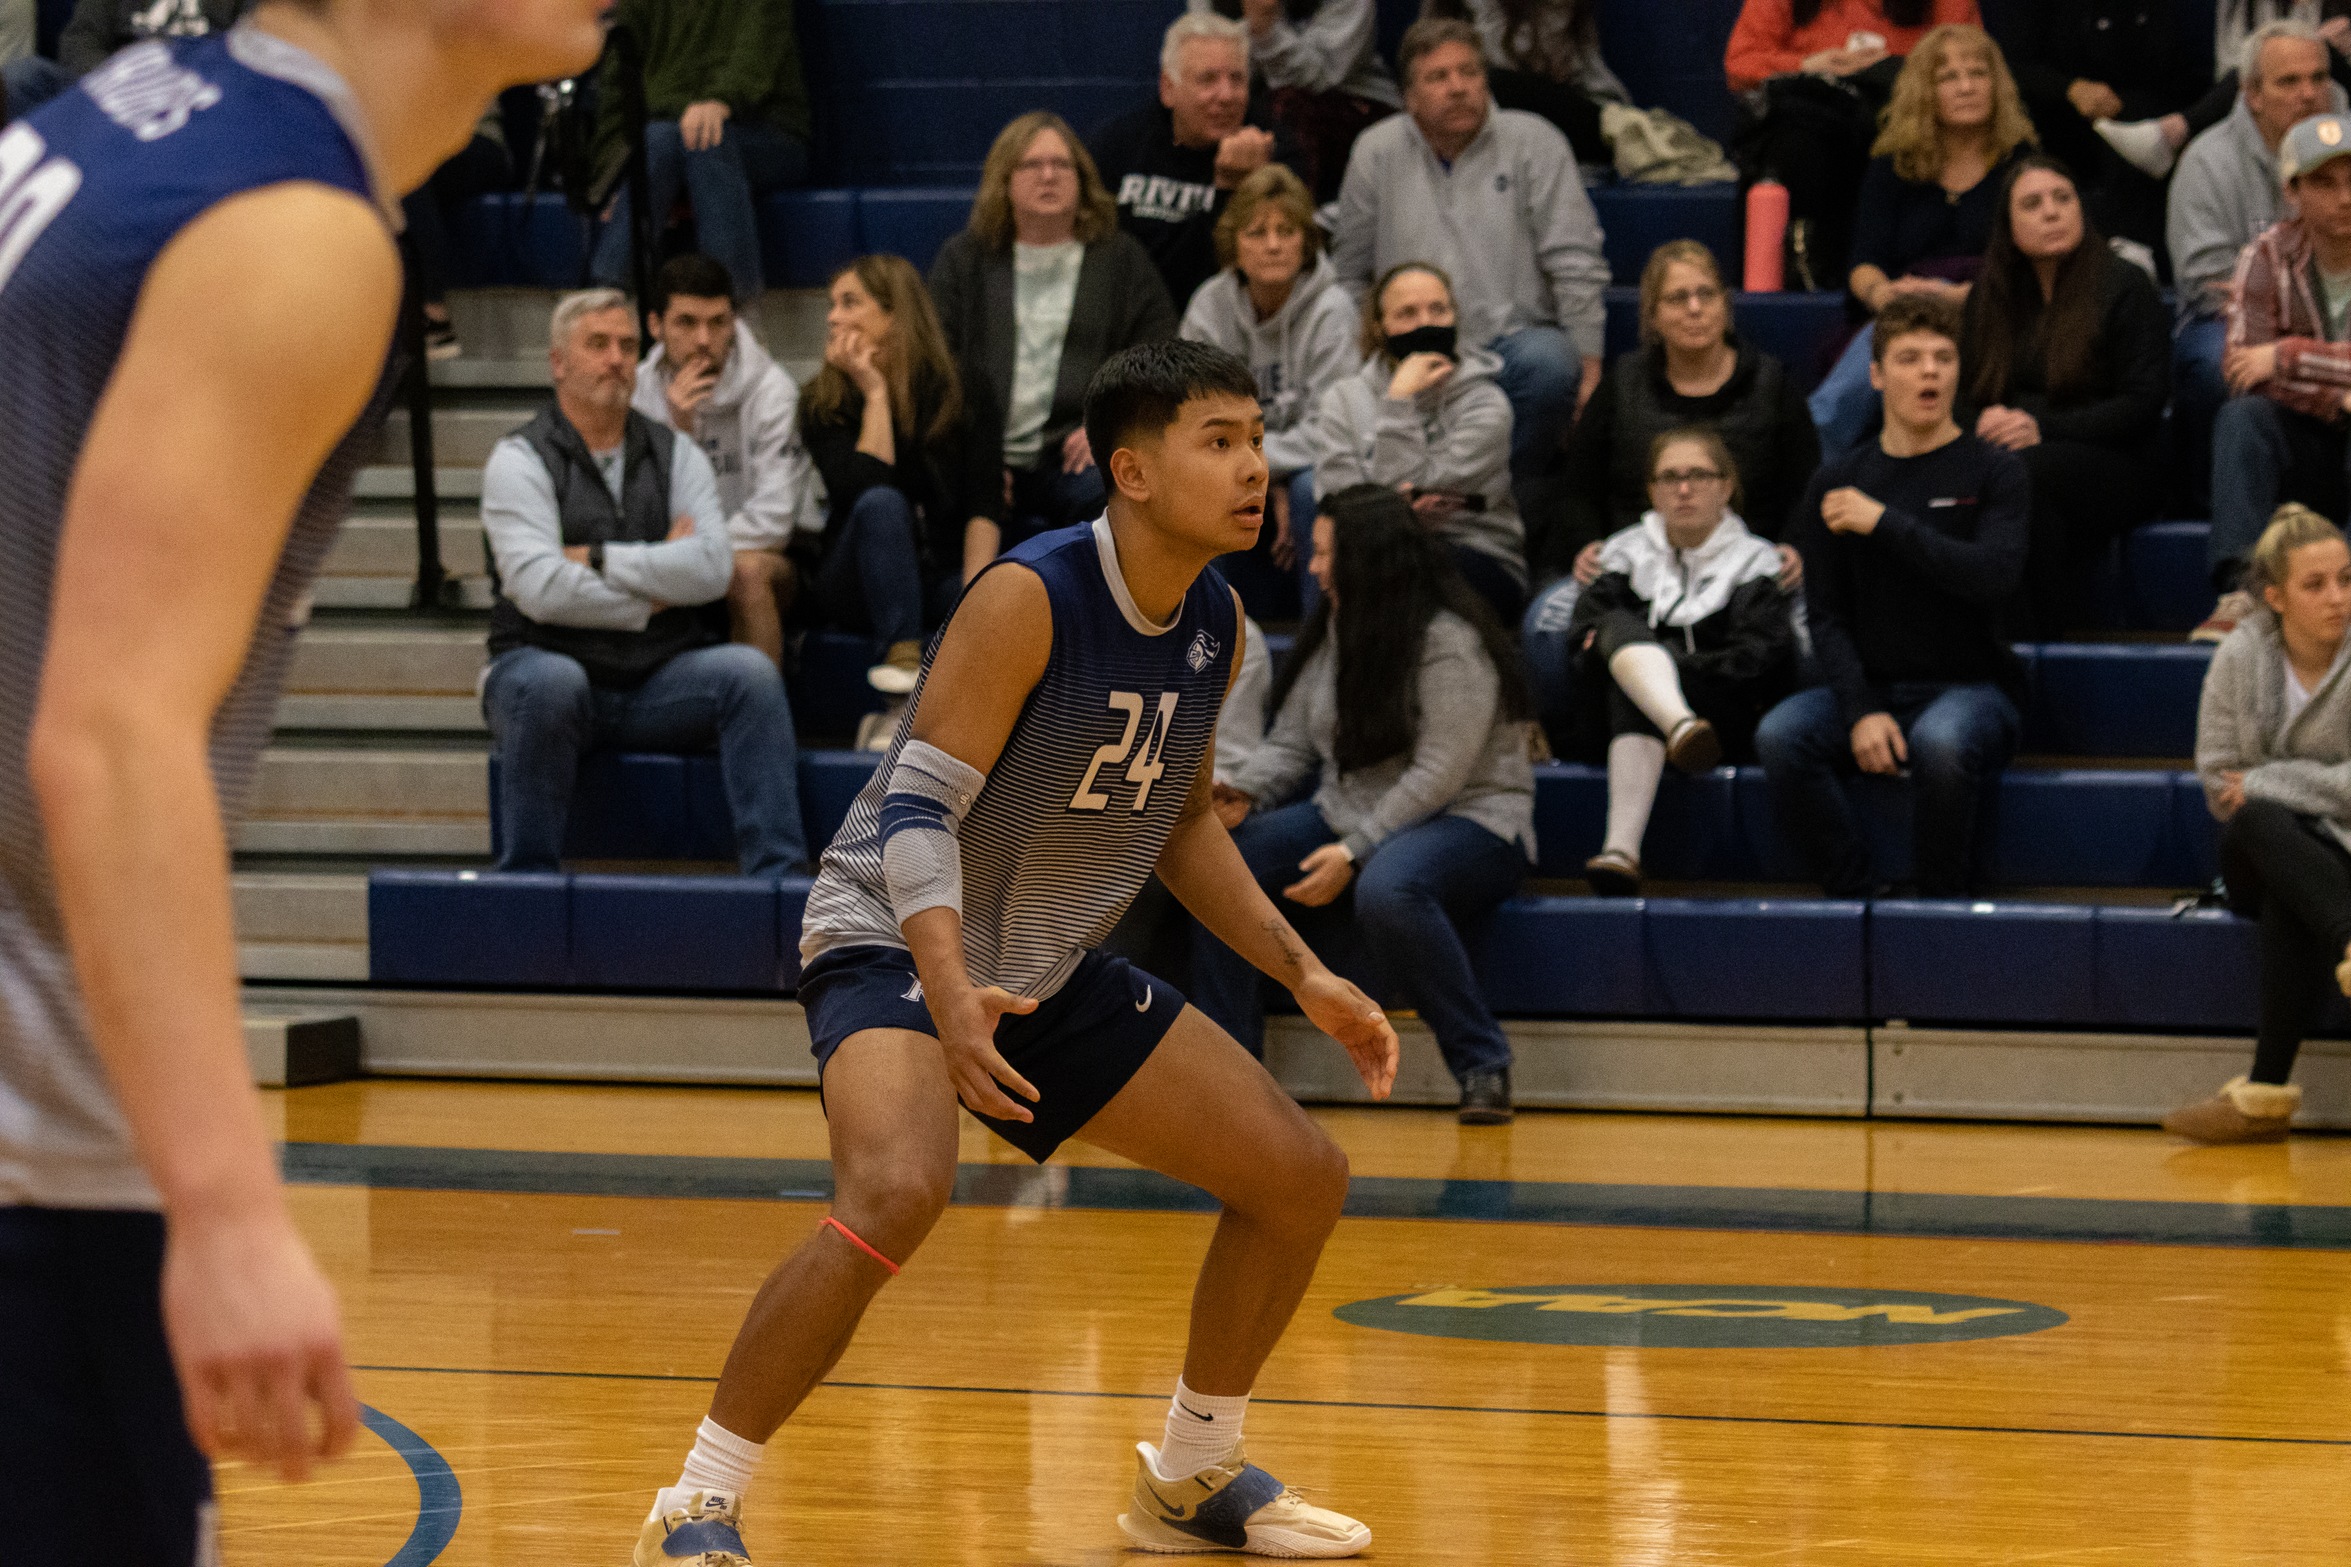 Men’s Volleyball Drops Two in Springfield